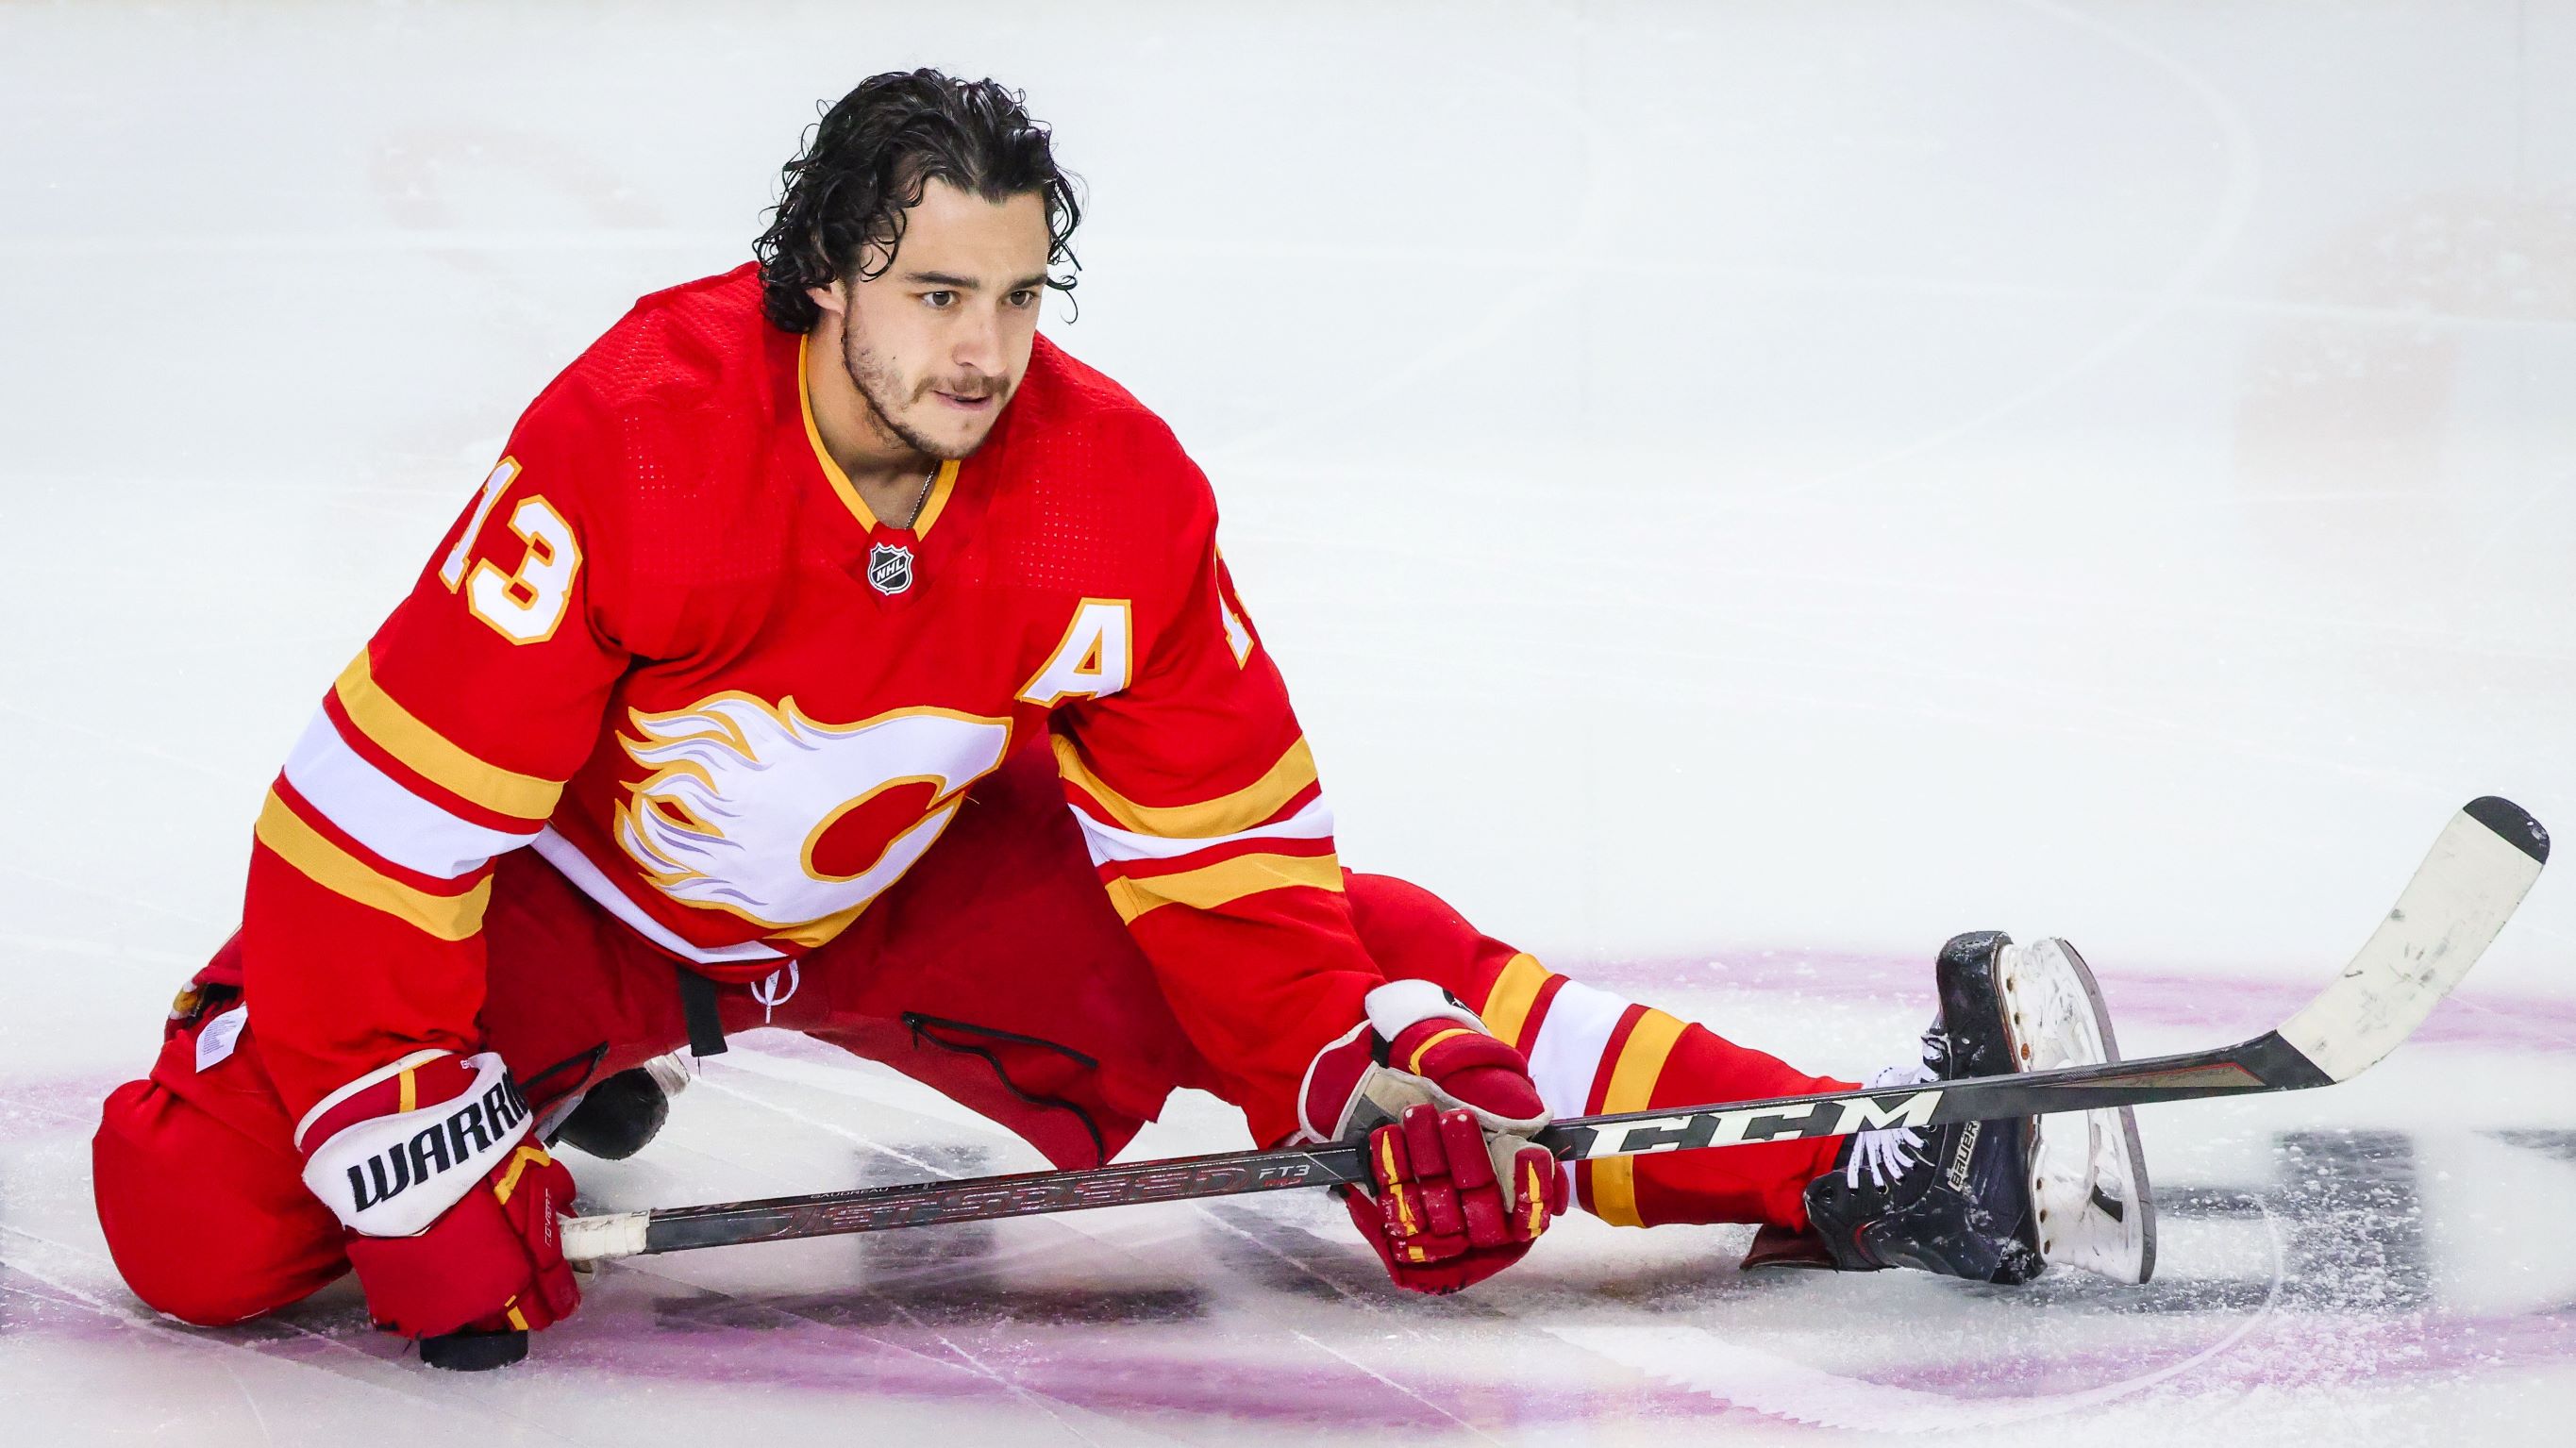 Flyers: Flames star and South Jersey native Johnny Gaudreau is a